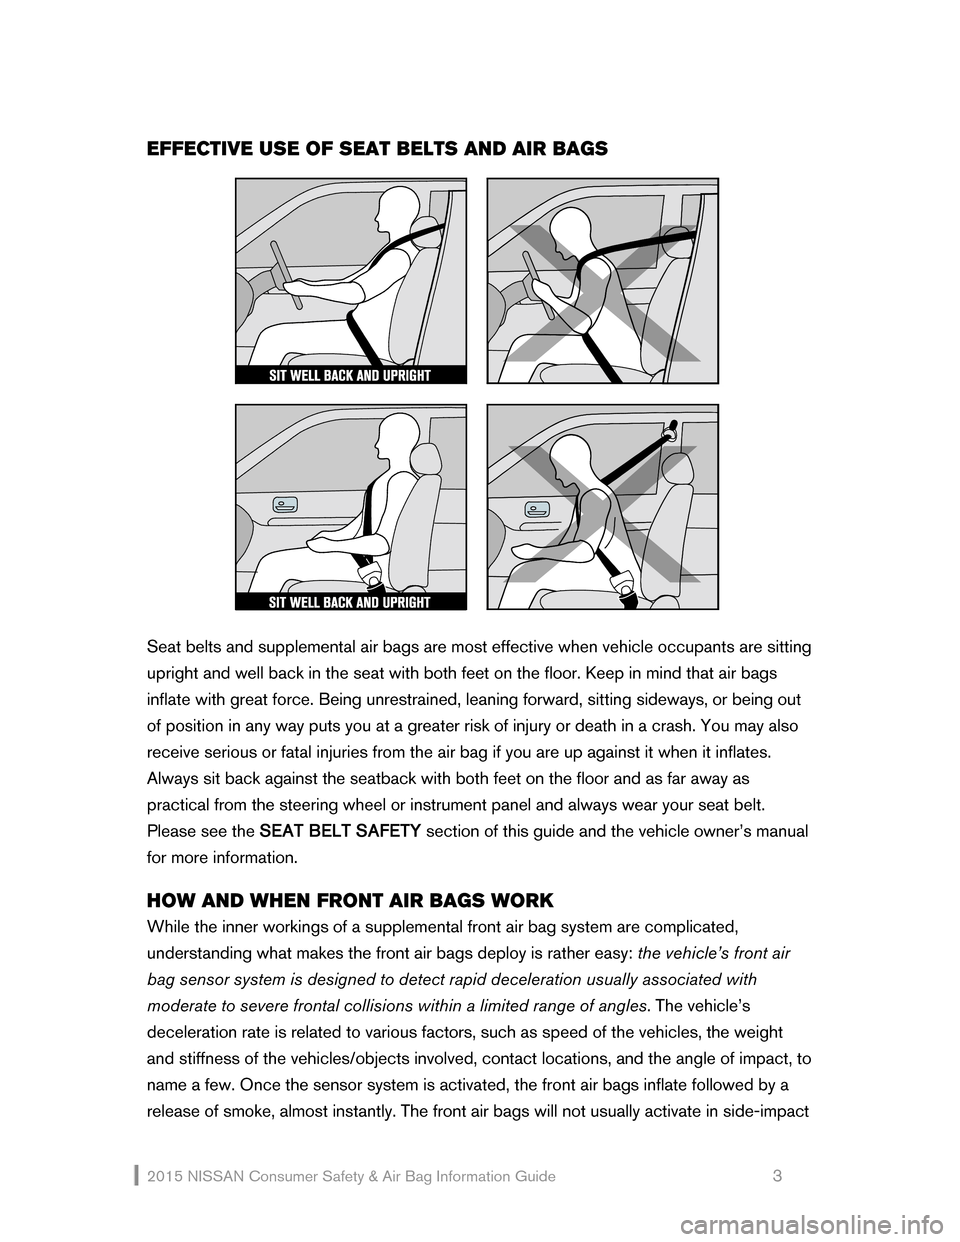 NISSAN GT-R 2015 R35 Consumer Safety Air Bag Information Guide 2015 NI\f\fAN  Consumer \fafety  & Air Bag Information Guide                                                     \b 
EFFE\fTIVE USE OF SEAT BELTS AND AIR BAGS 
 
 
 
\feat belts and supplemental air b